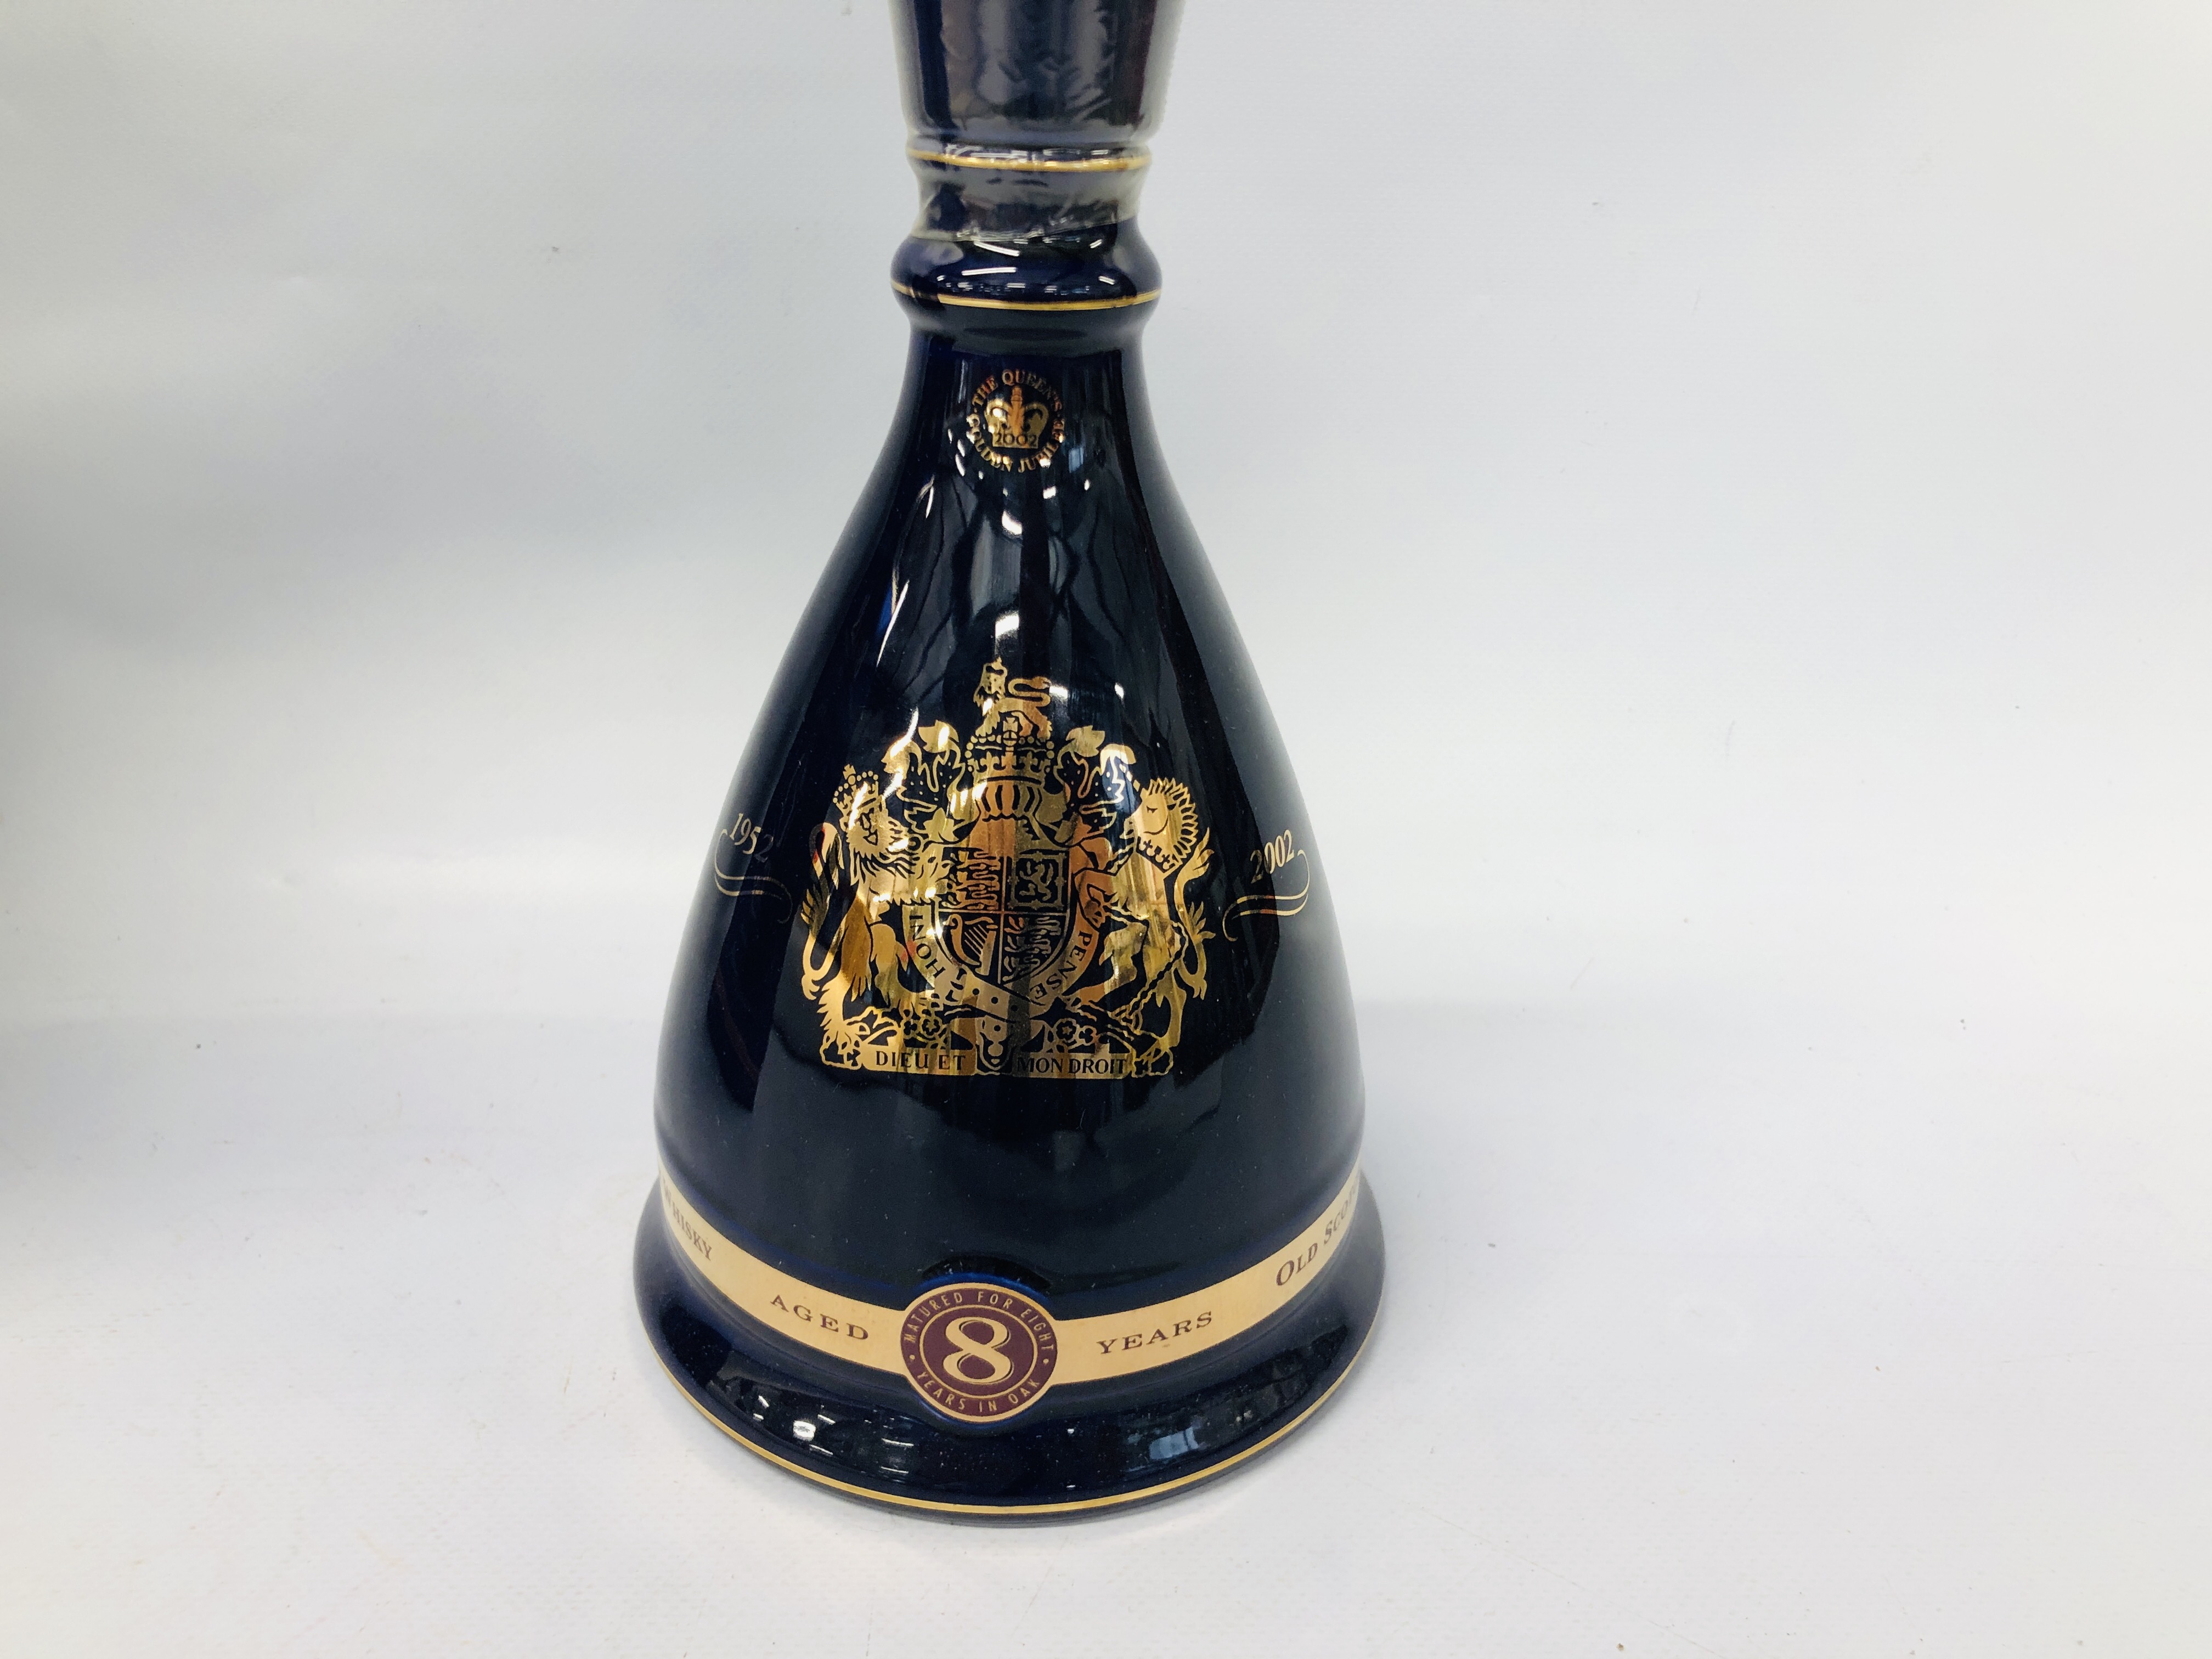 BELLS EXTRA SPECIAL OLD SCOTCH WHISKY LIMITED EDITION GOLD JUBILEE DECANTER 70CL (BOXED) - Image 3 of 4